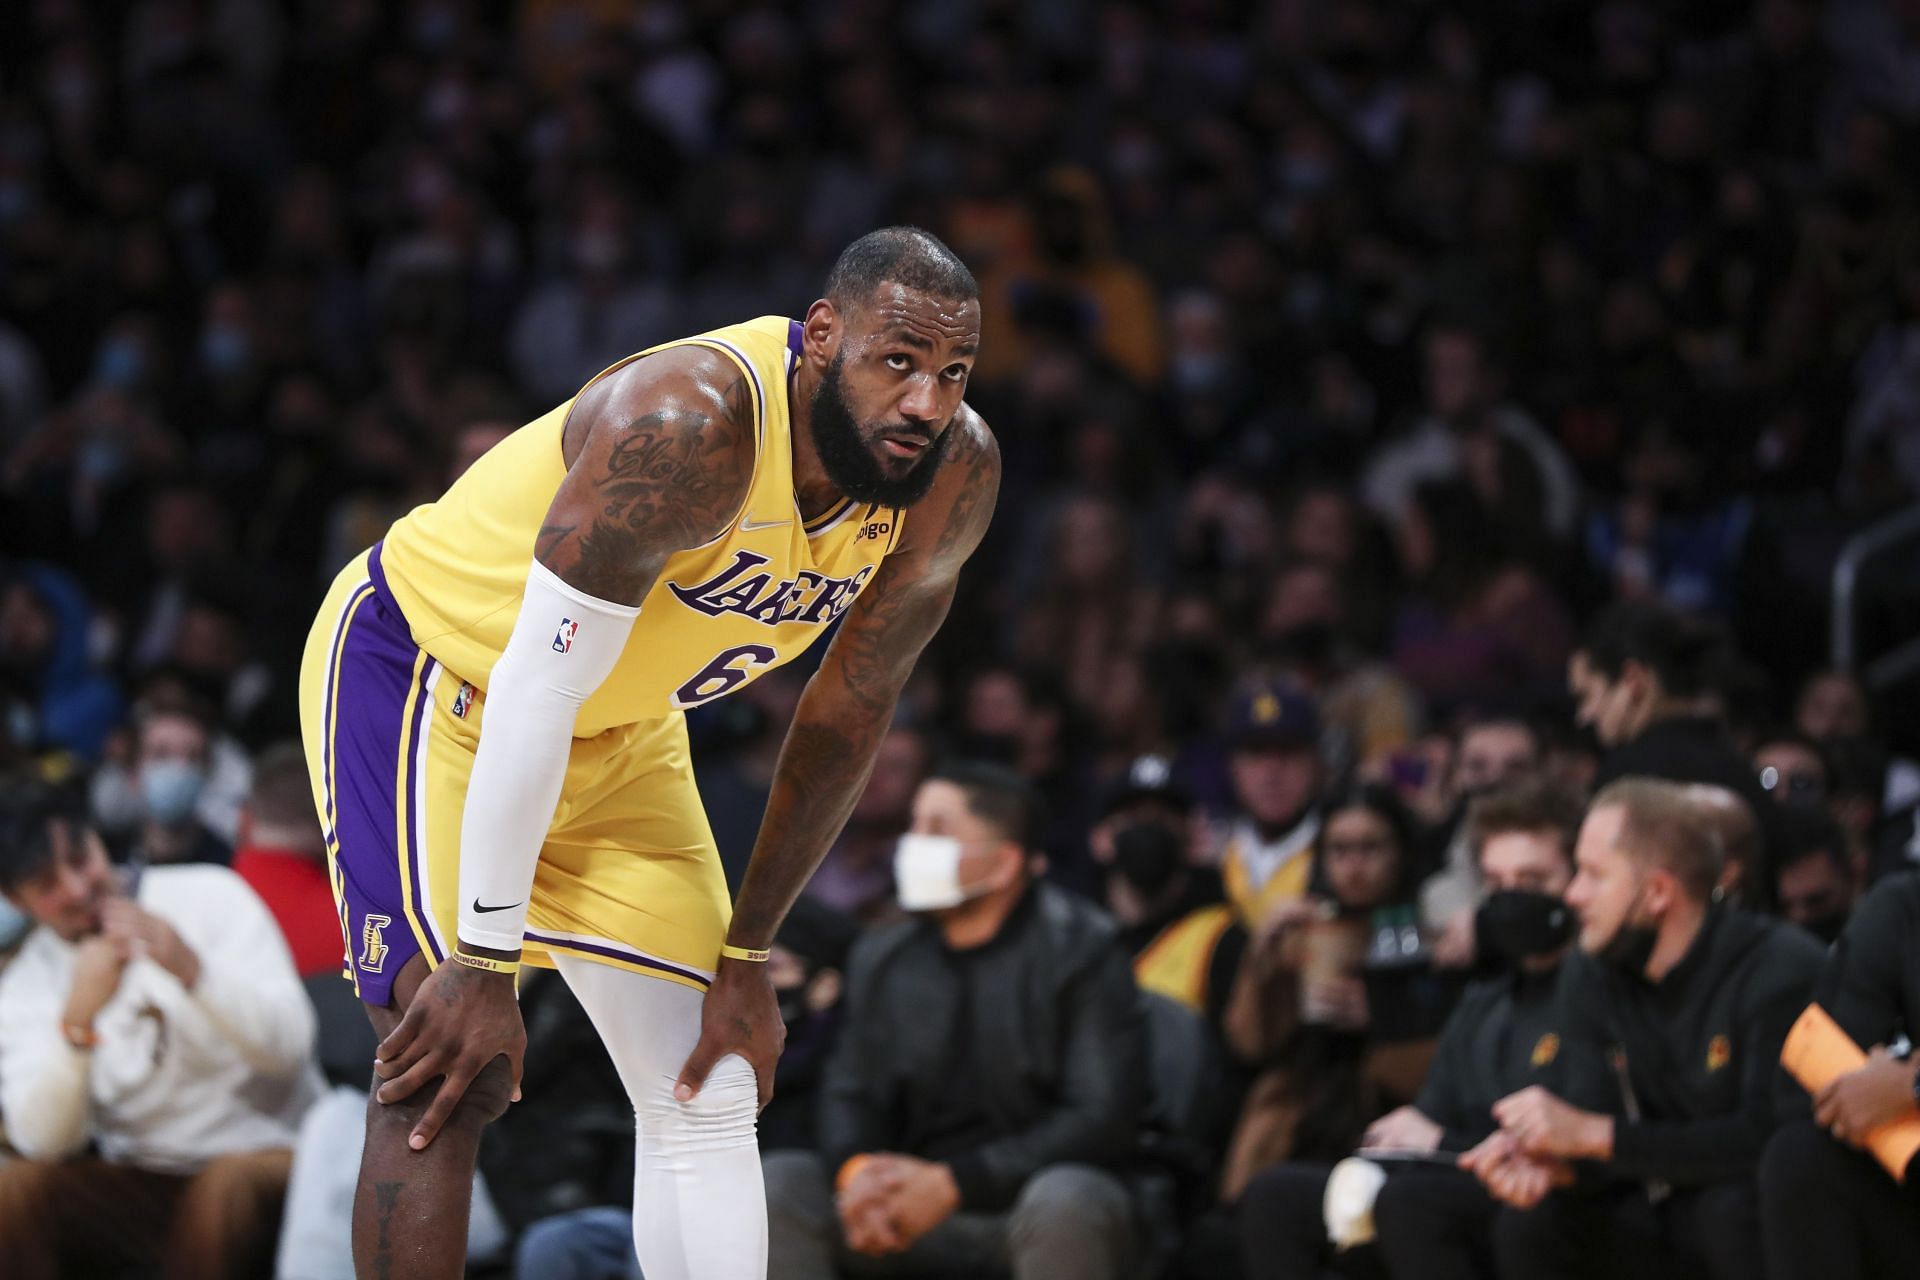 LeBron James #6 of the Los Angeles Lakers reacts during a game